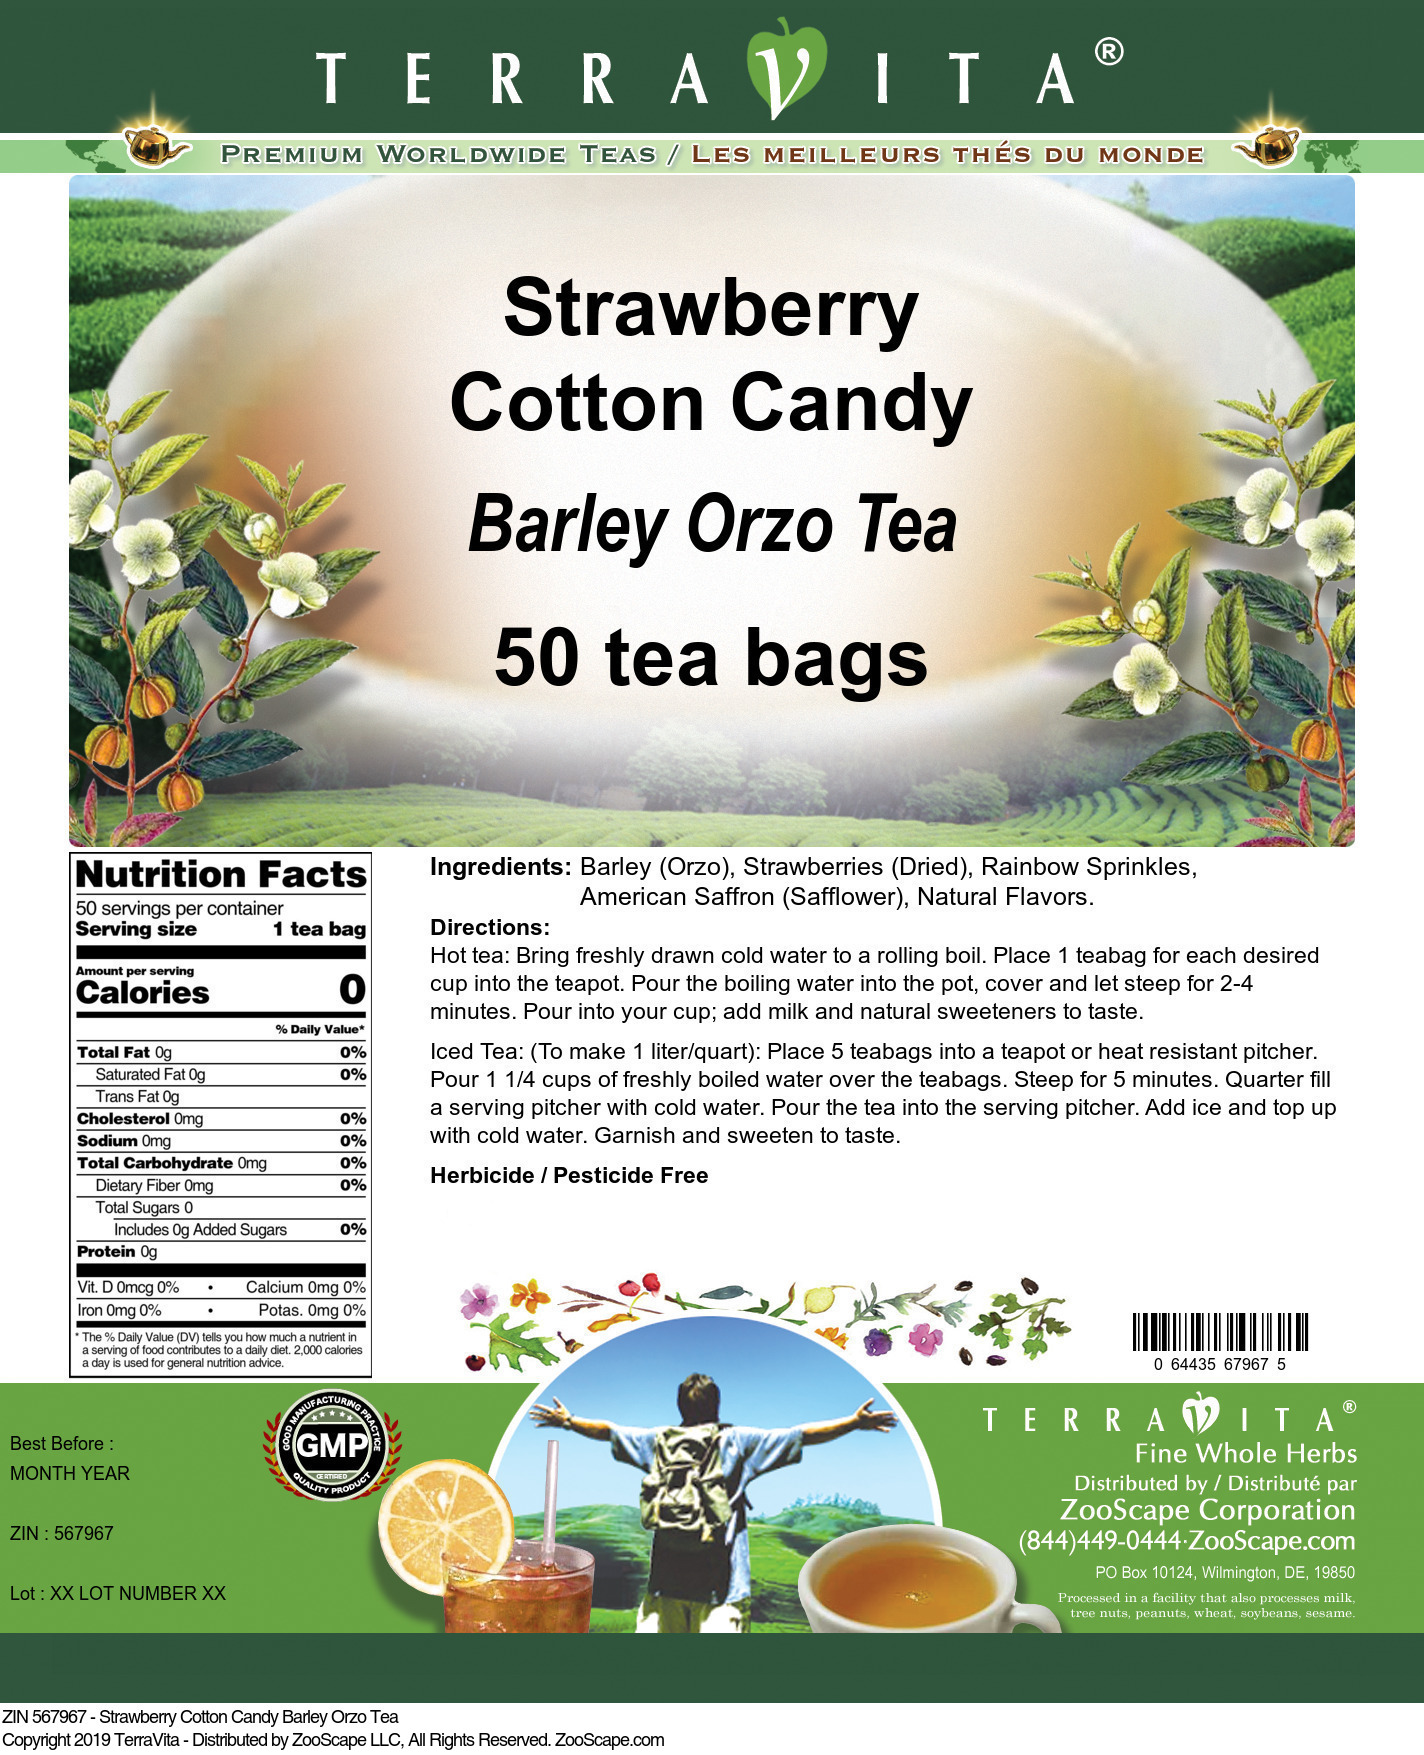 Strawberry Cotton Candy Barley Orzo Tea - Label